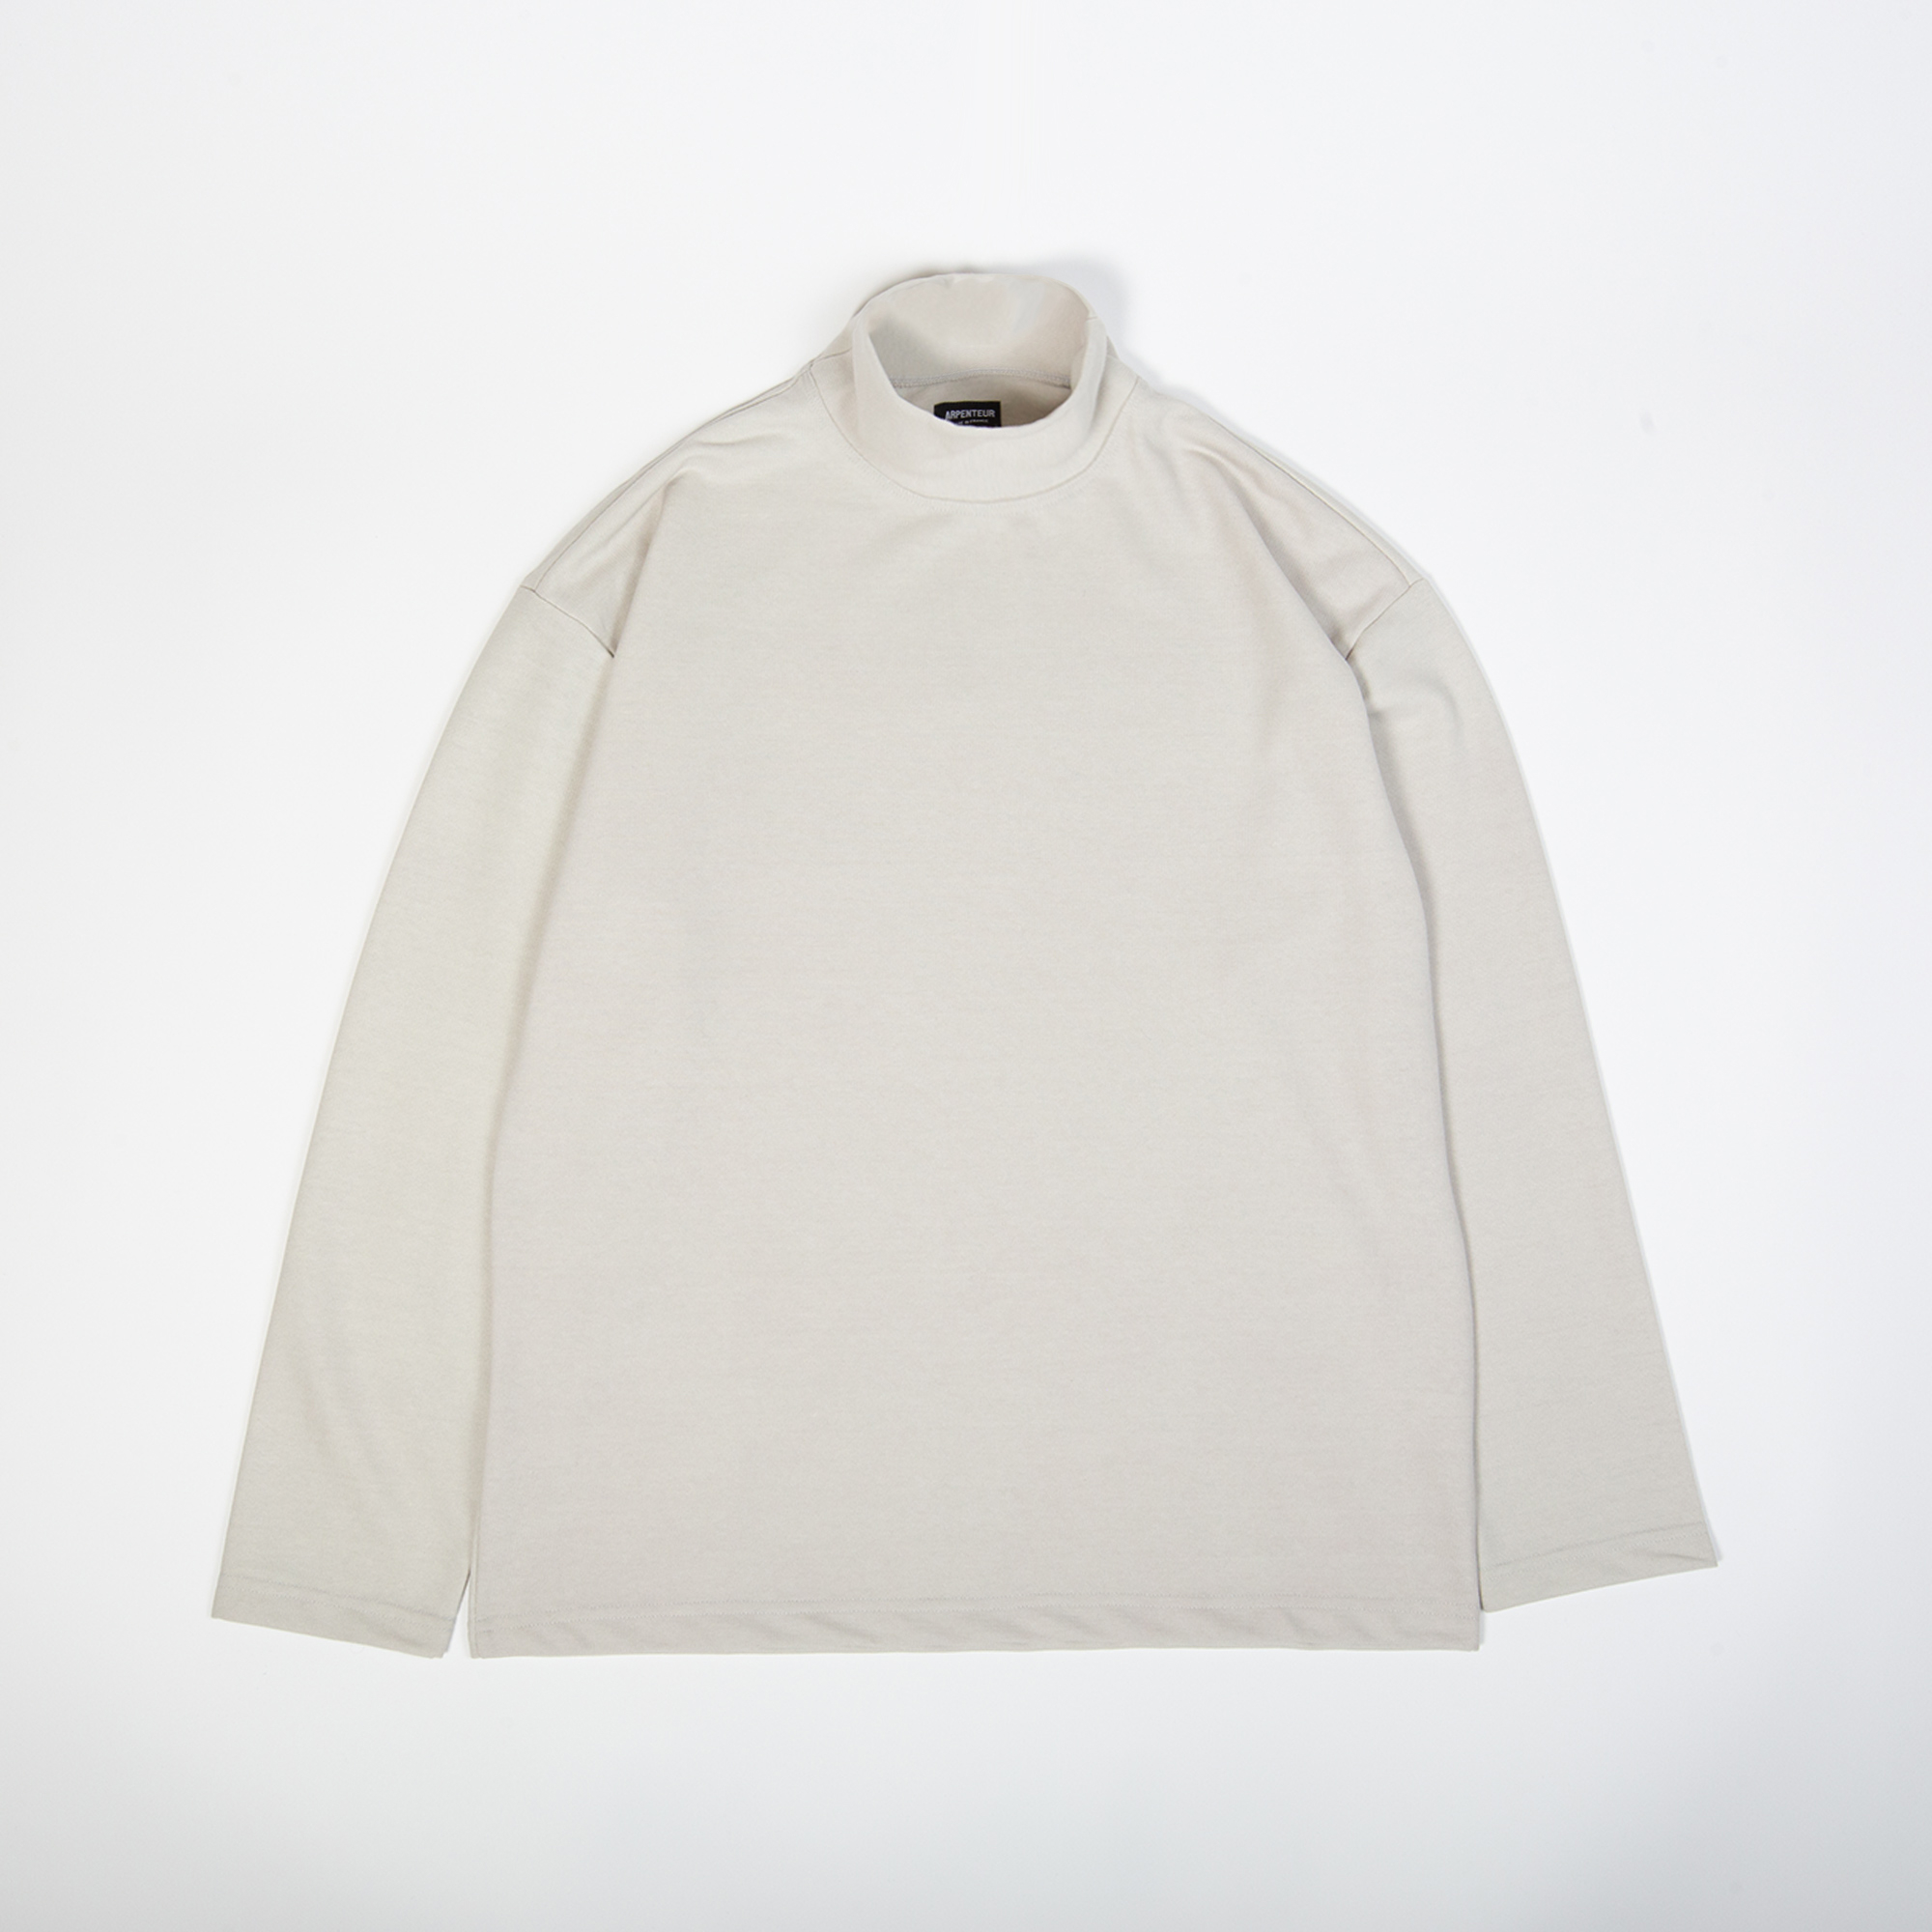 ORLO t-shirt in Cream color by Arpenteur